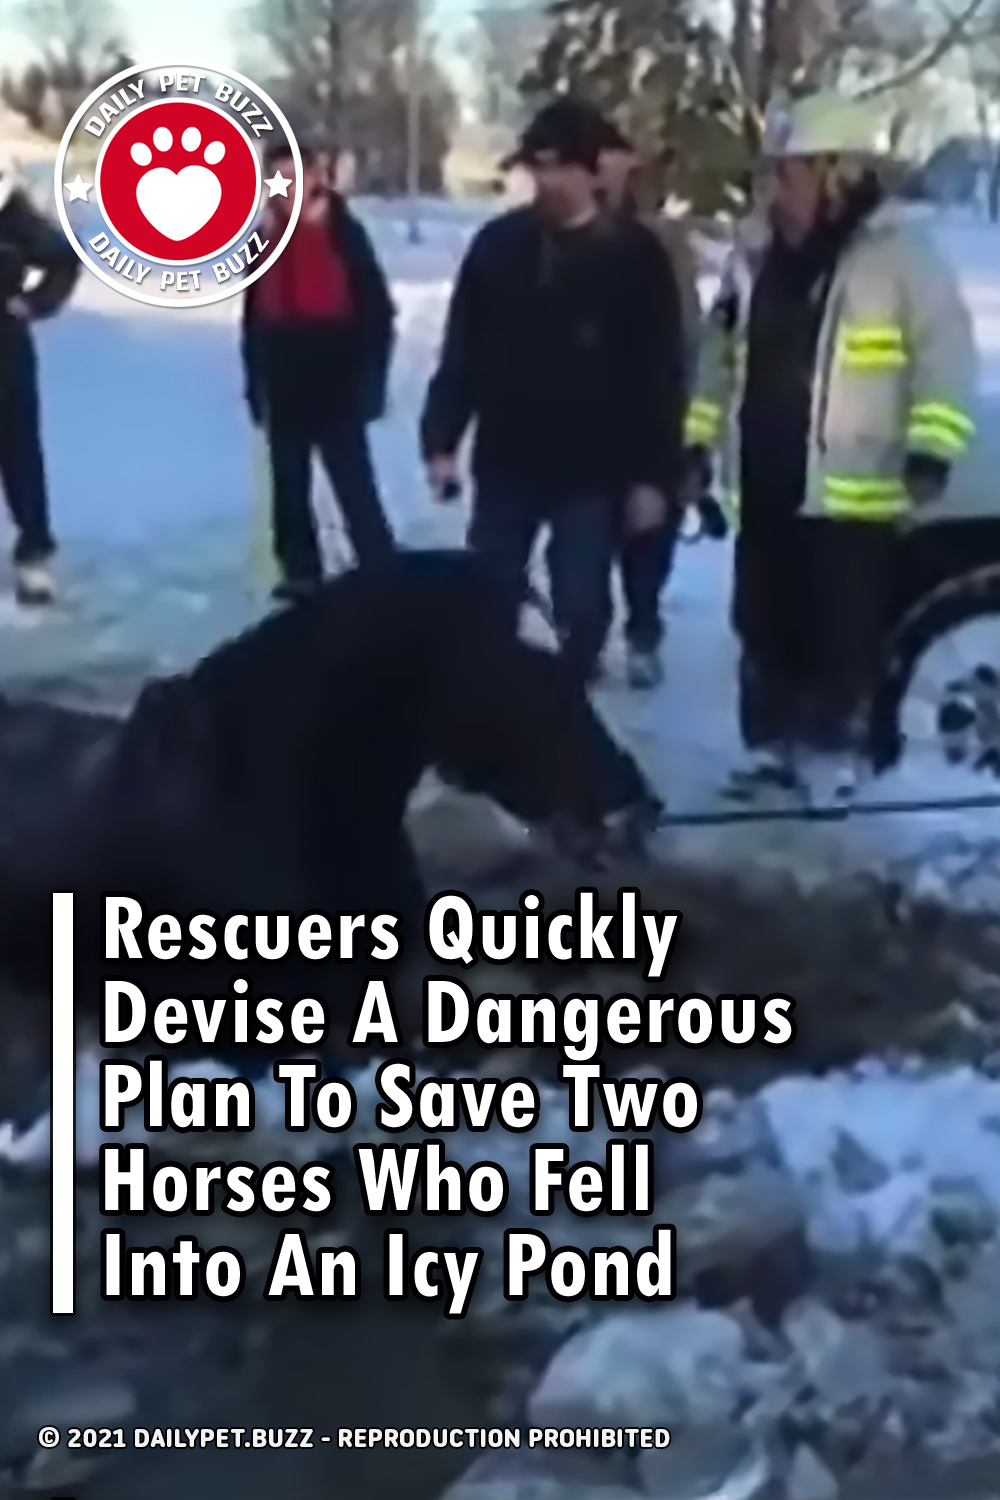 Rescuers Quickly Devise A Dangerous Plan To Save Two Horses Who Fell Into An Icy Pond